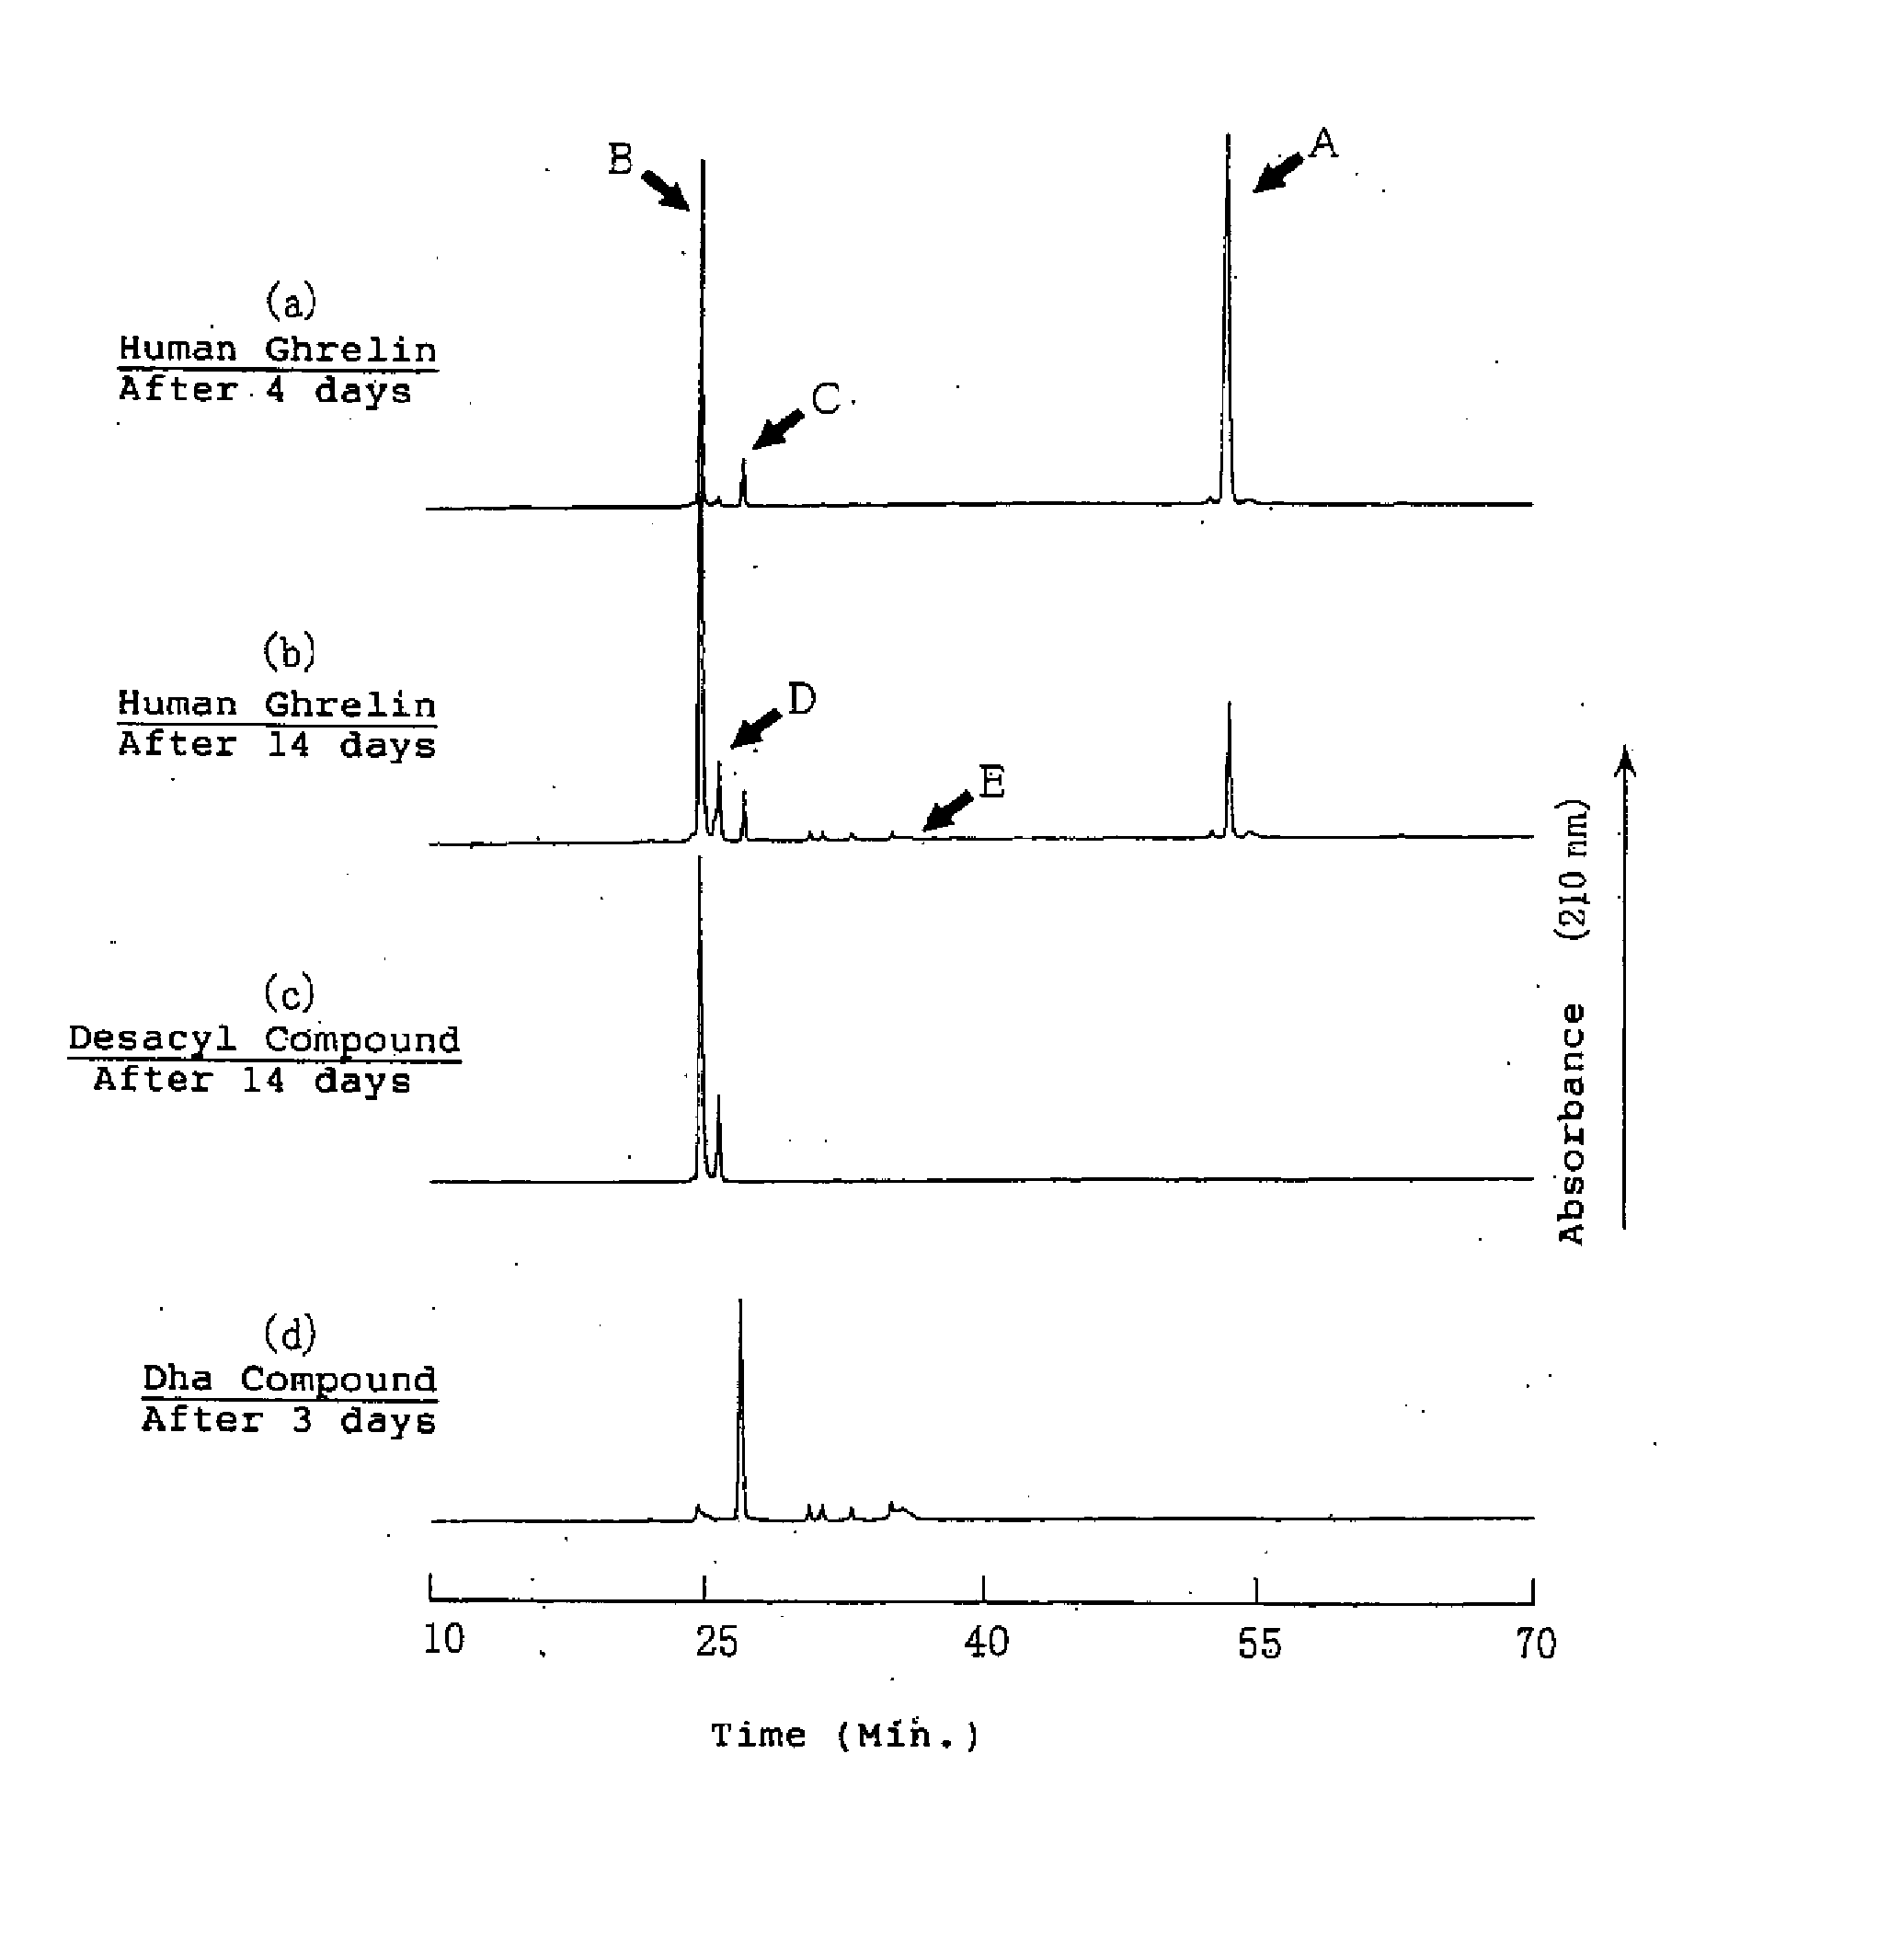 Medical compositions containing ghrelin